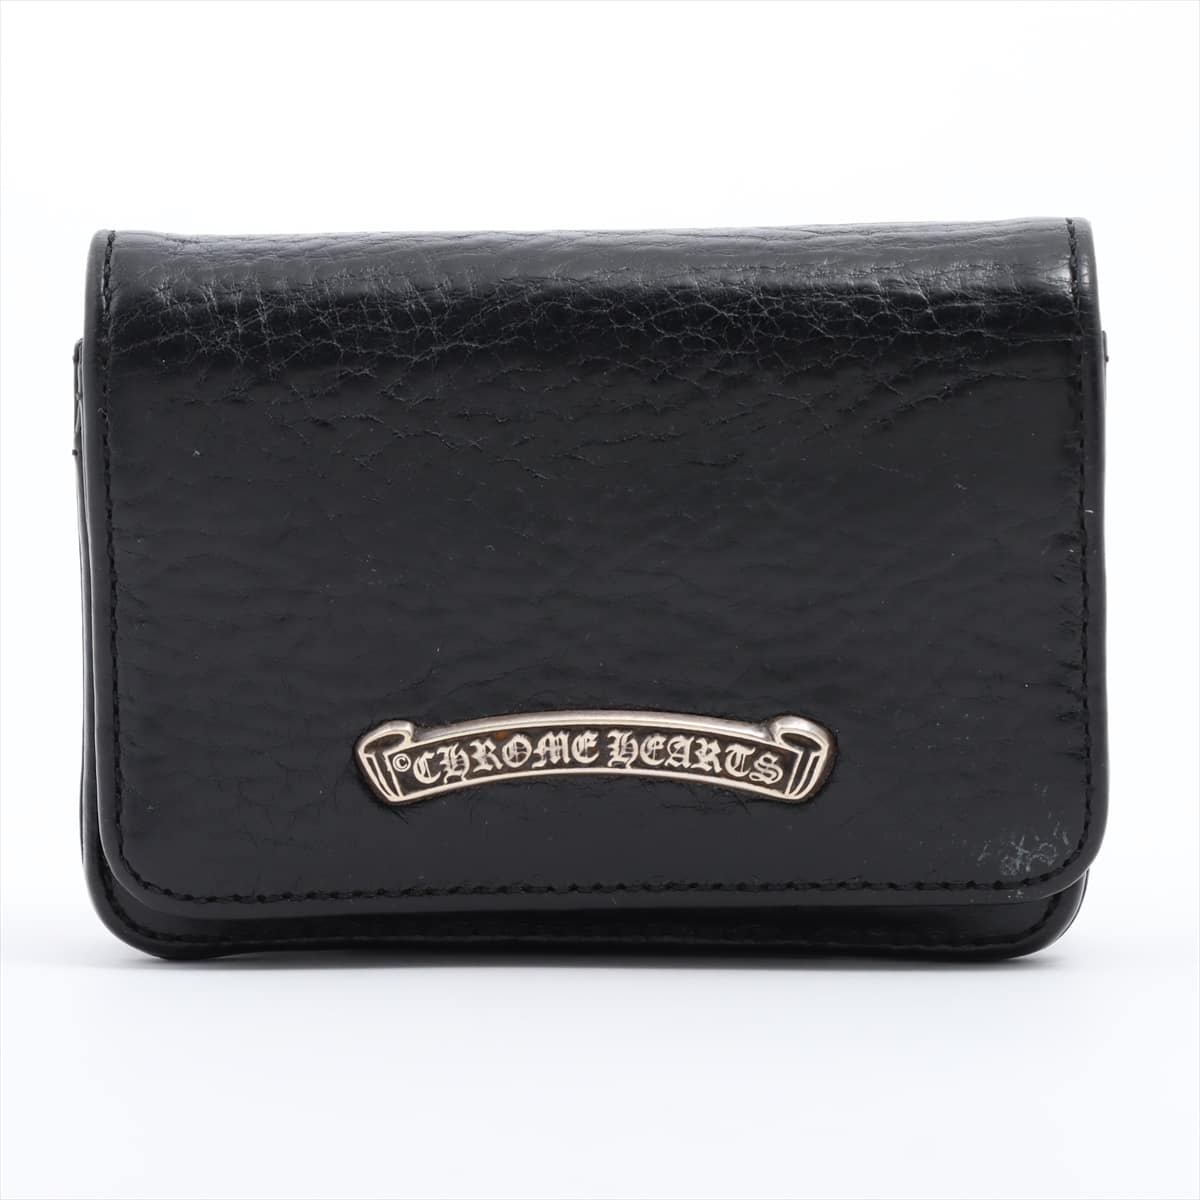 Chrome Hearts Card Case Leather & 925 With invoice 3 pockets Black